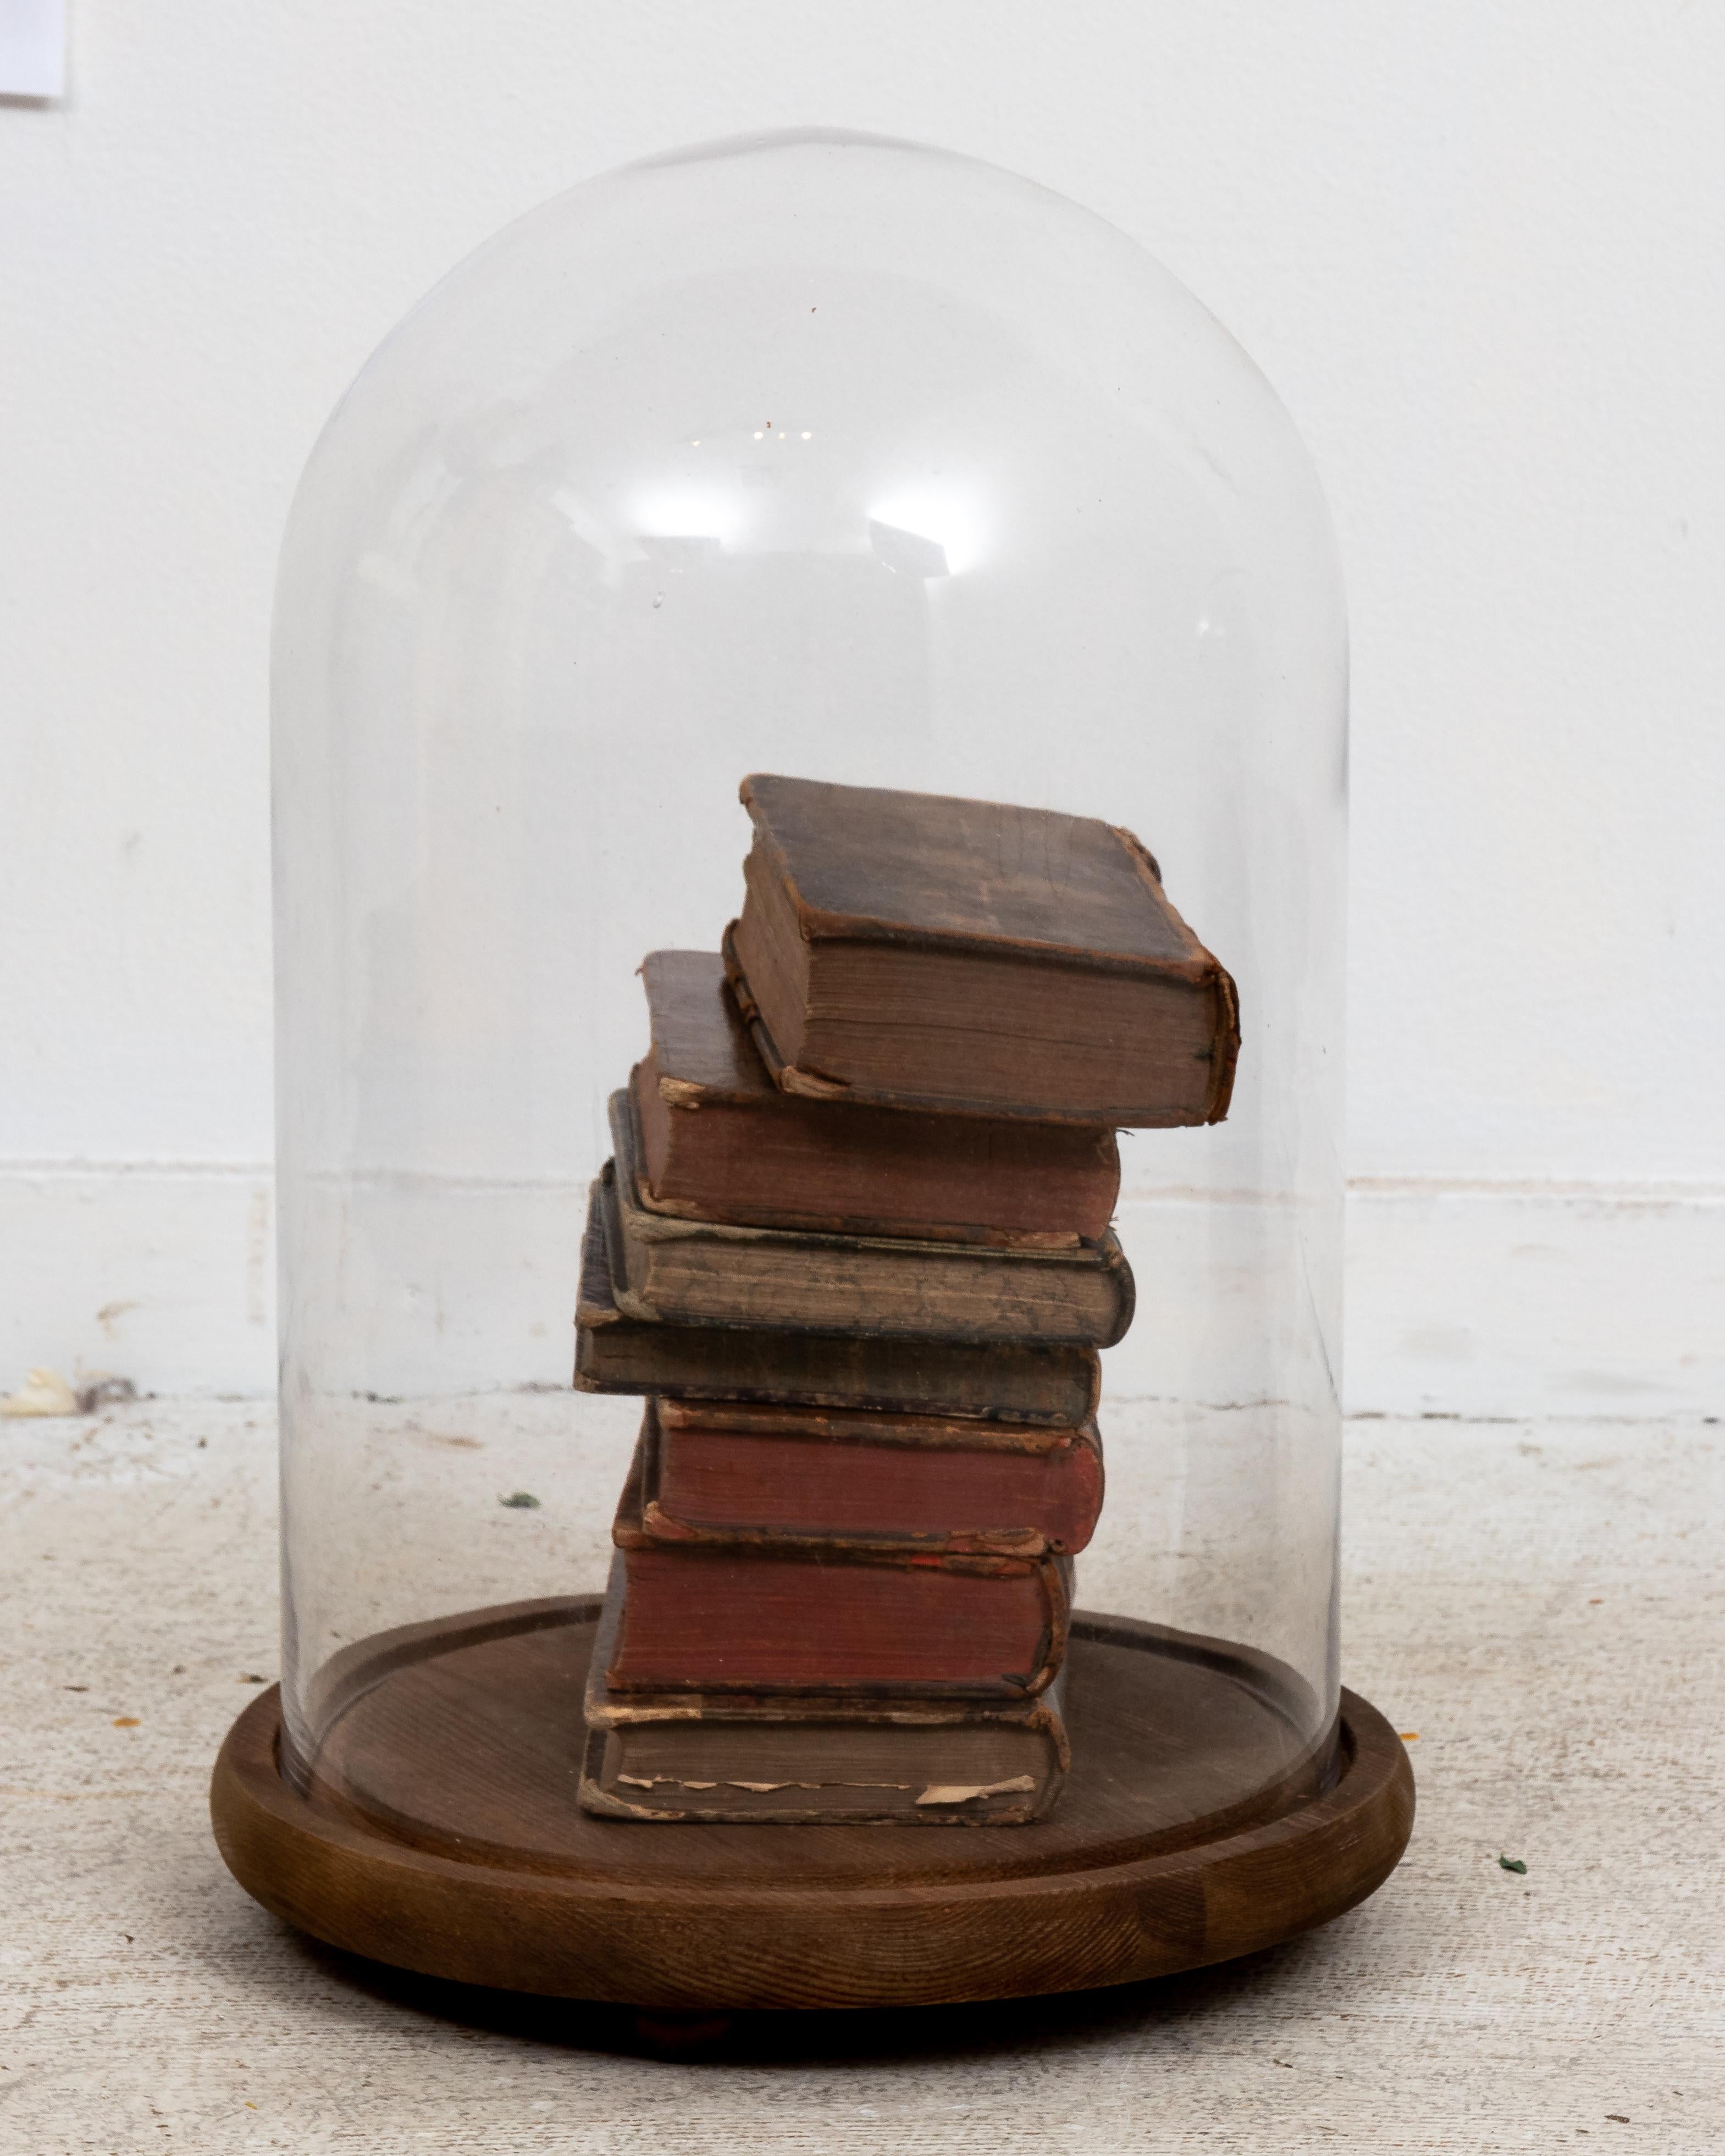 Circa 20th century collection of antique and vintage leather books displayed in a new glass cloche with wood base. Made in England. Please note of wear consistent with age.